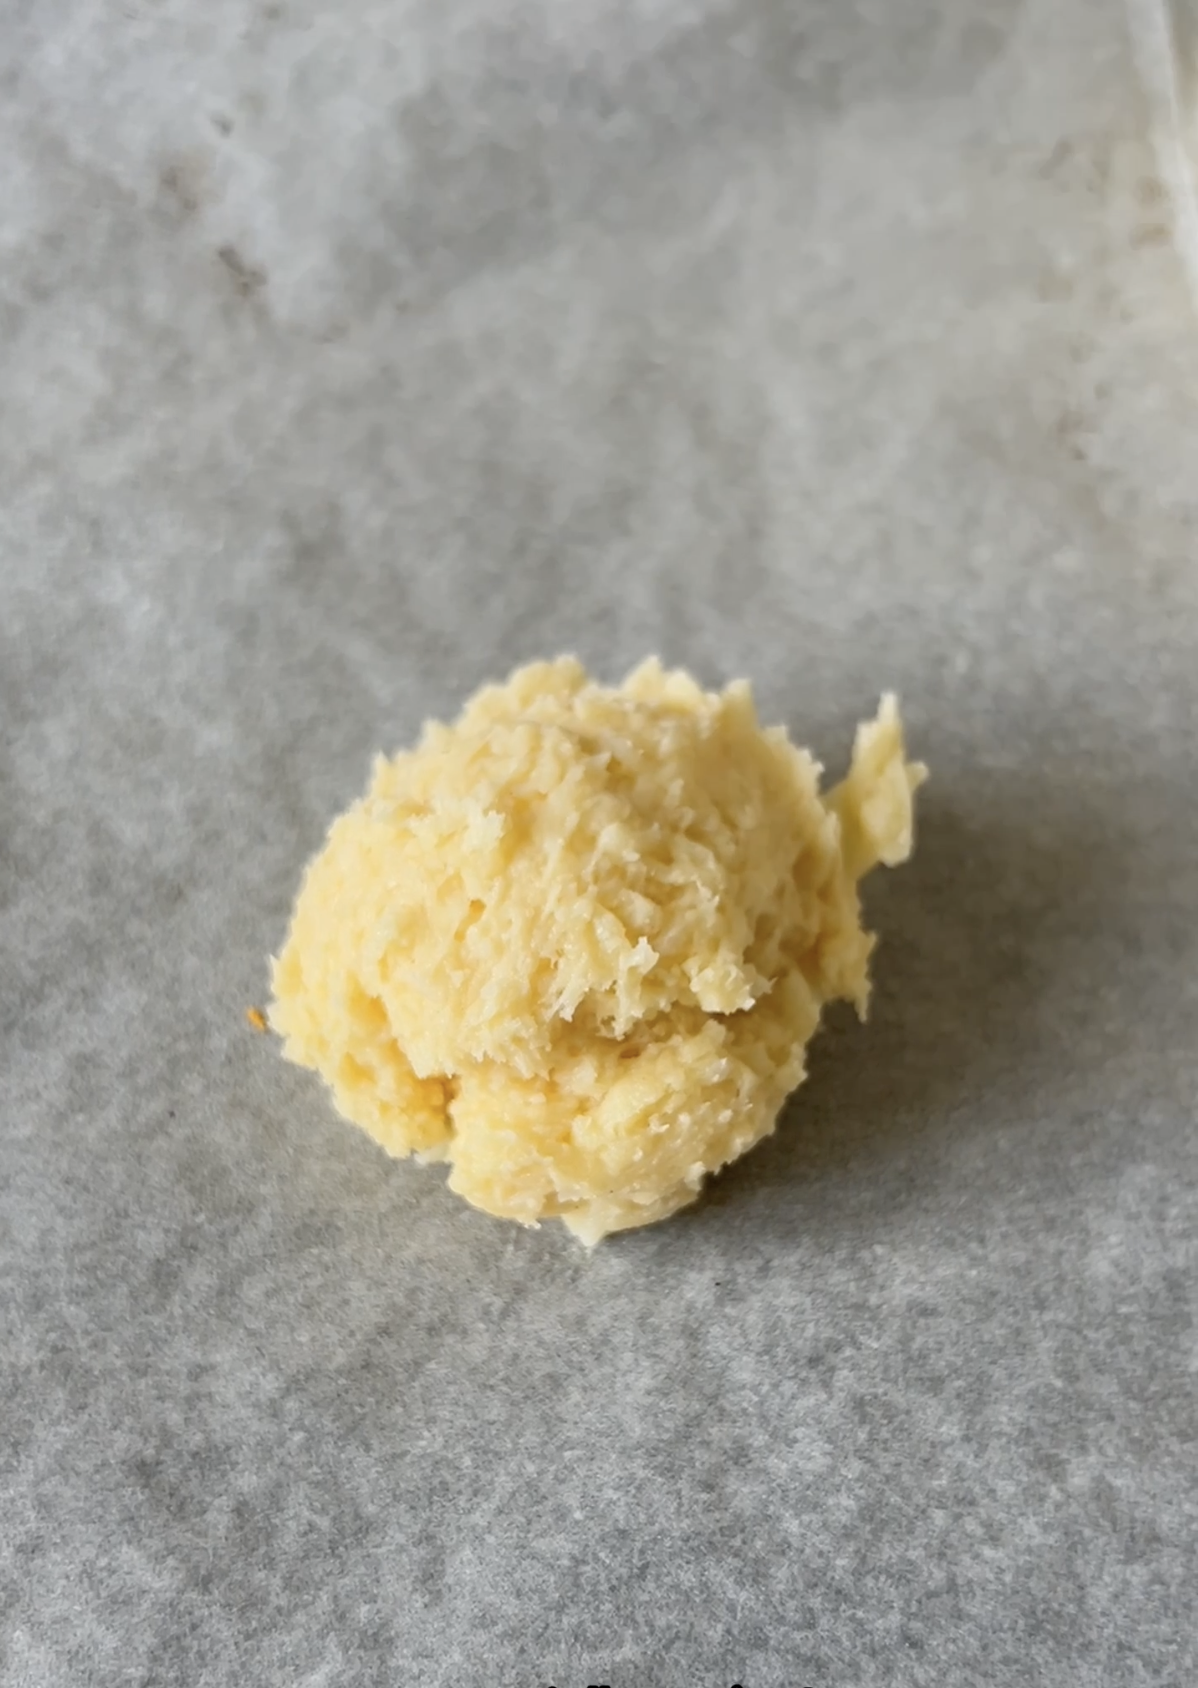 A ball of savory cookie dough placed on a sheet of parchment paper before baking.